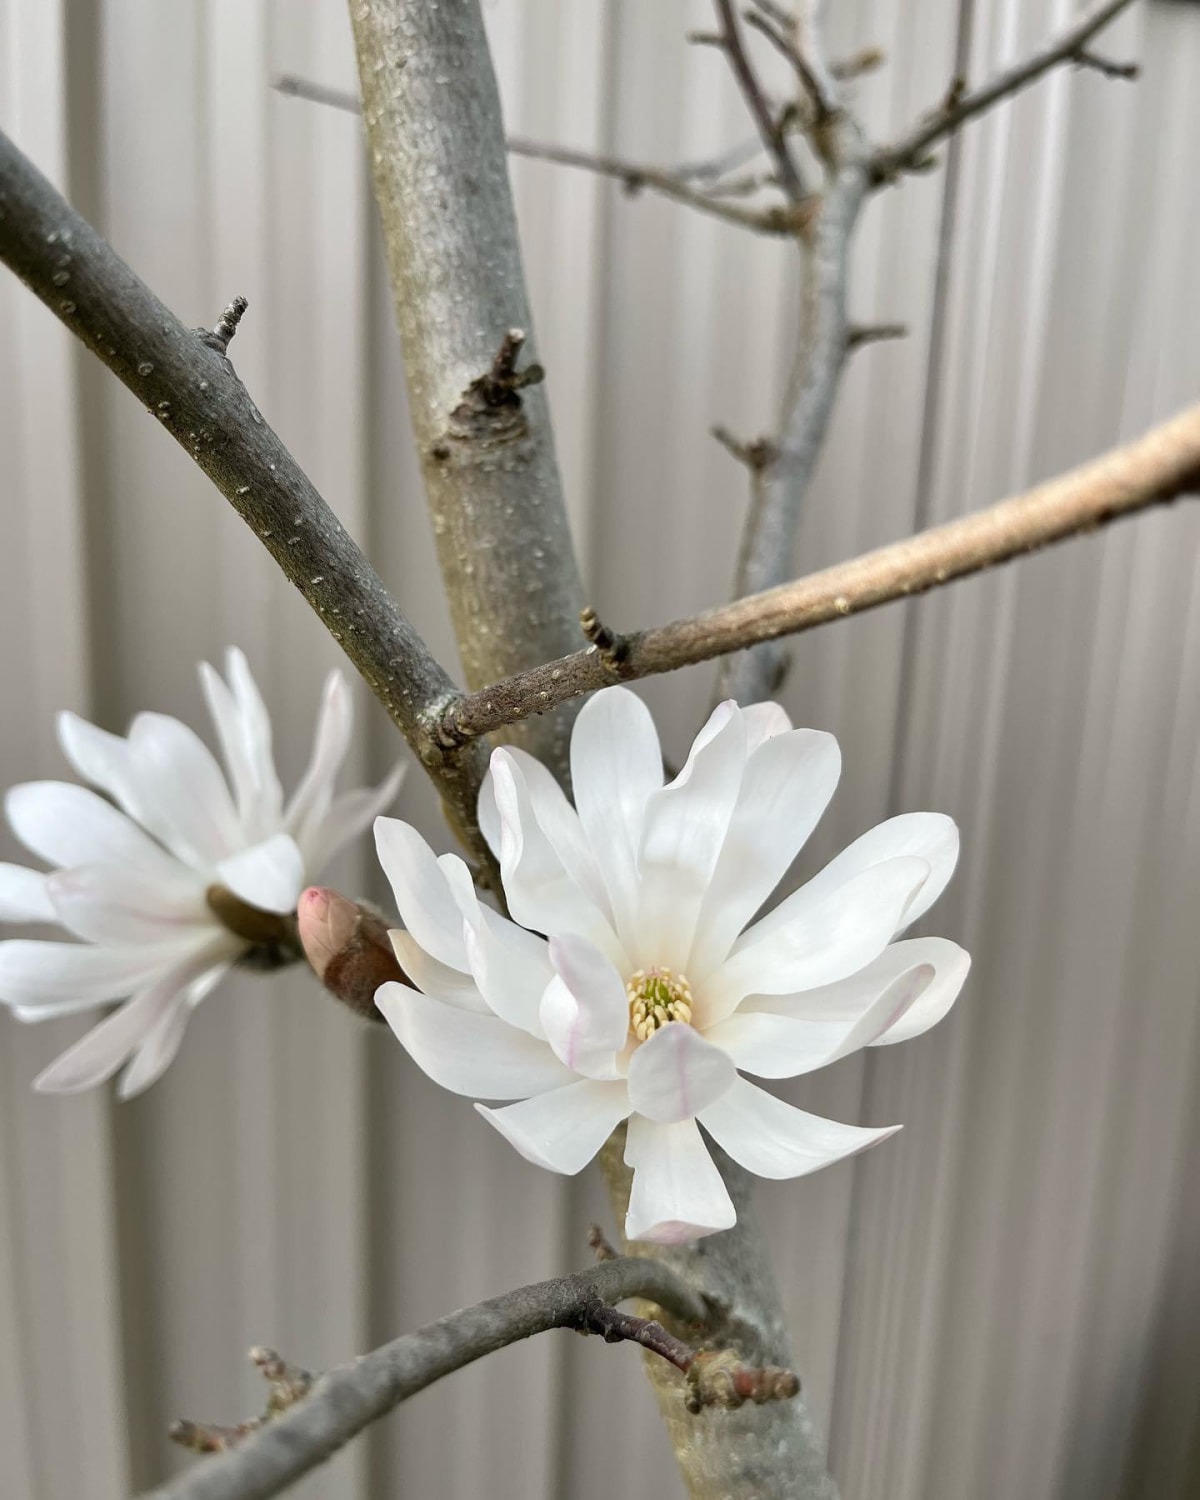 Spring is here with my star magnolia